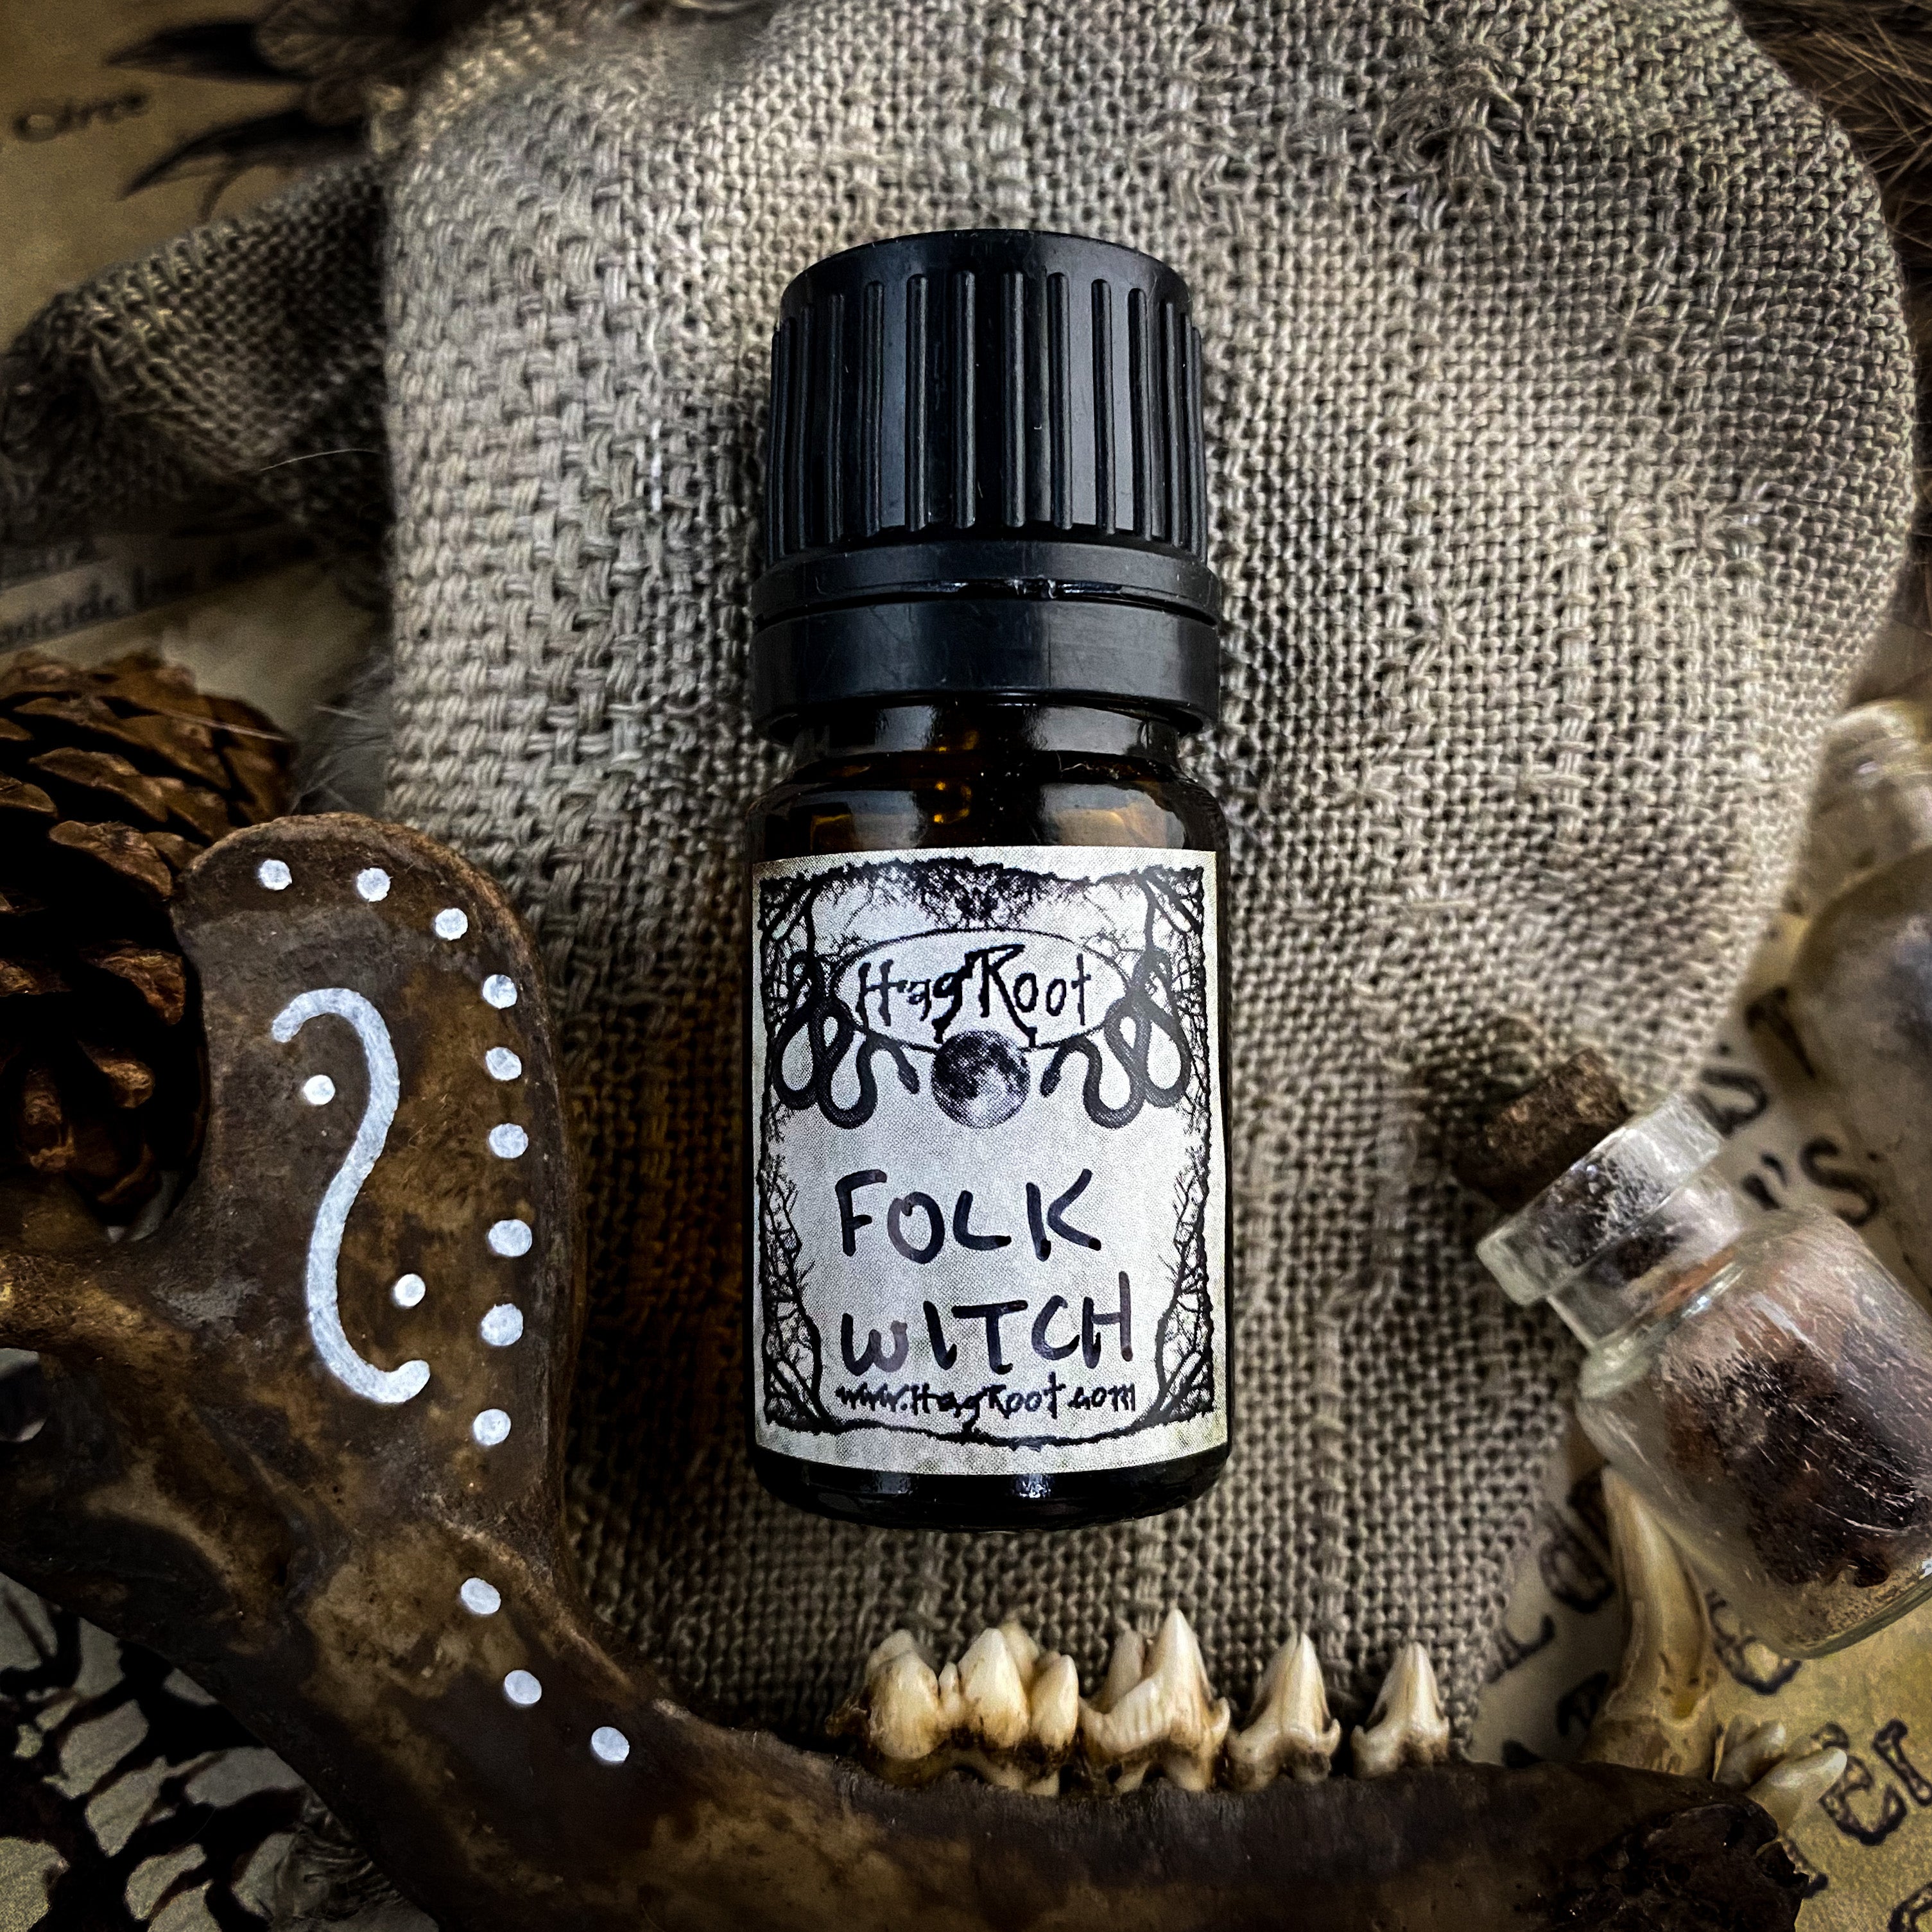 FOLK WITCH-(Evergreen Trees, Ceremonial Fire and Warm Spiced Bread)-Perfume, Cologne, Anointing, Ritual Oil